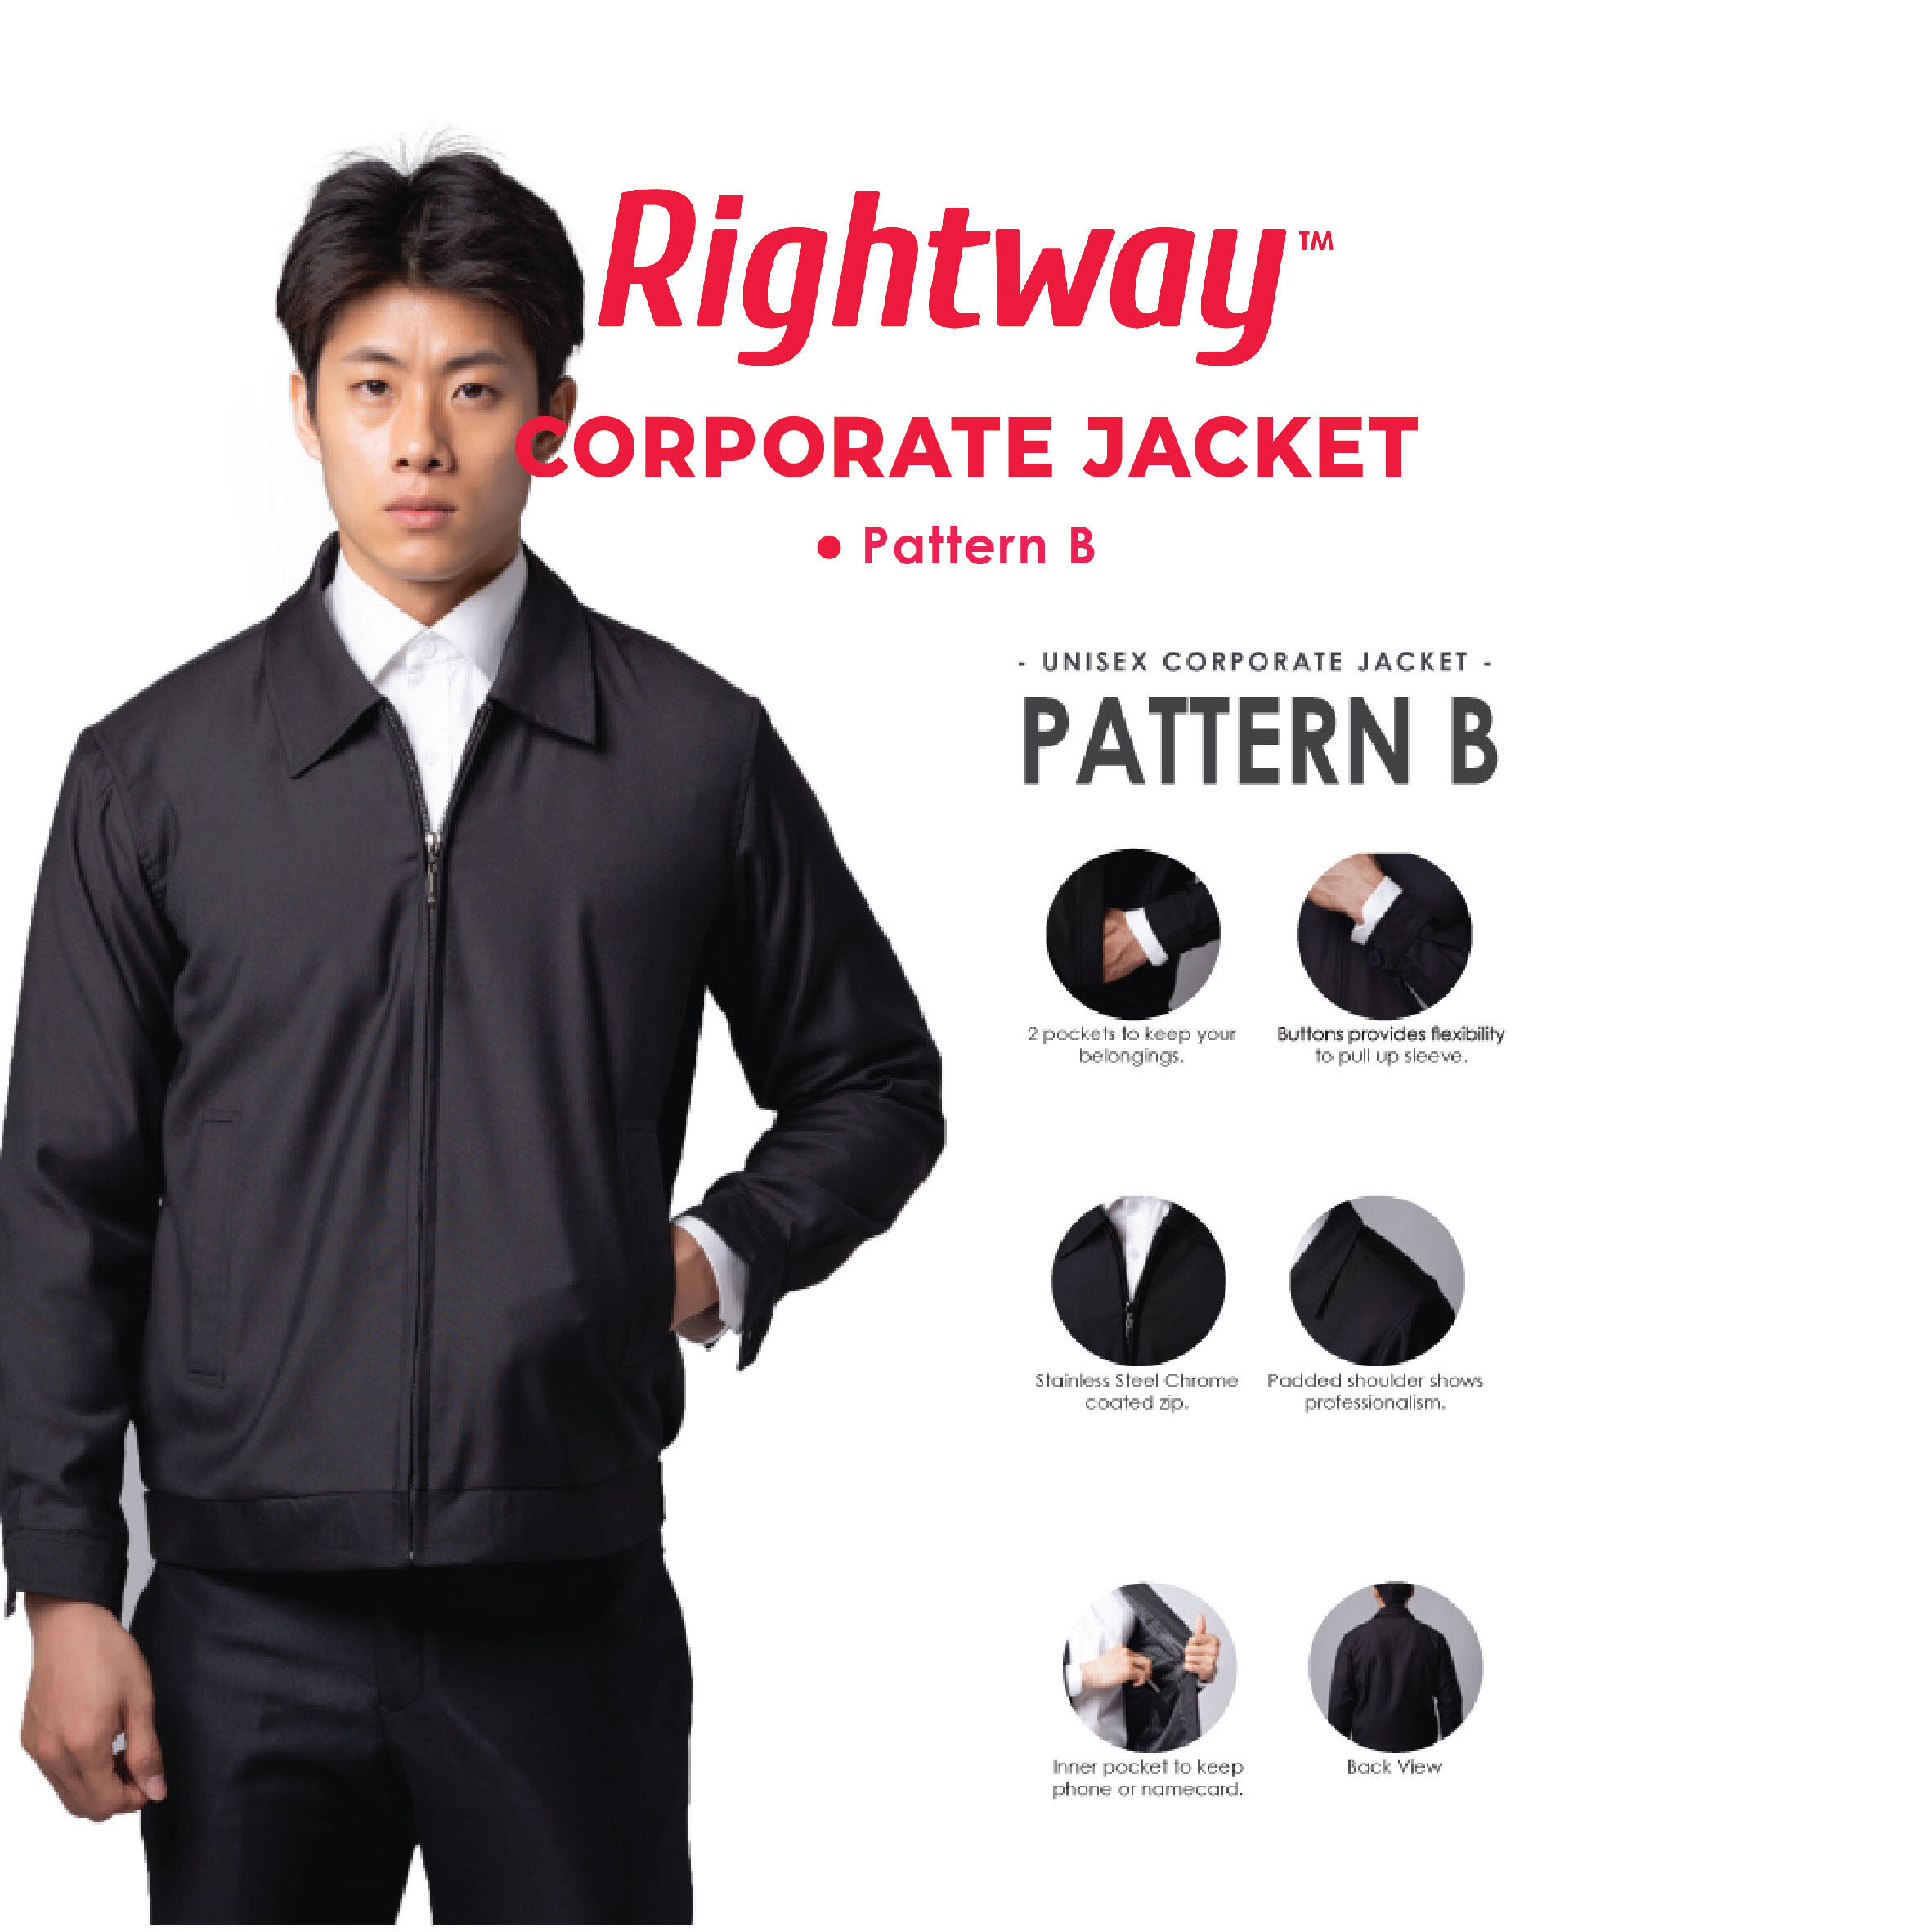 Rightway Pattern B Unisex Executive Jacket Bomber Office Jacket - Black All Size Available From XS-4XL